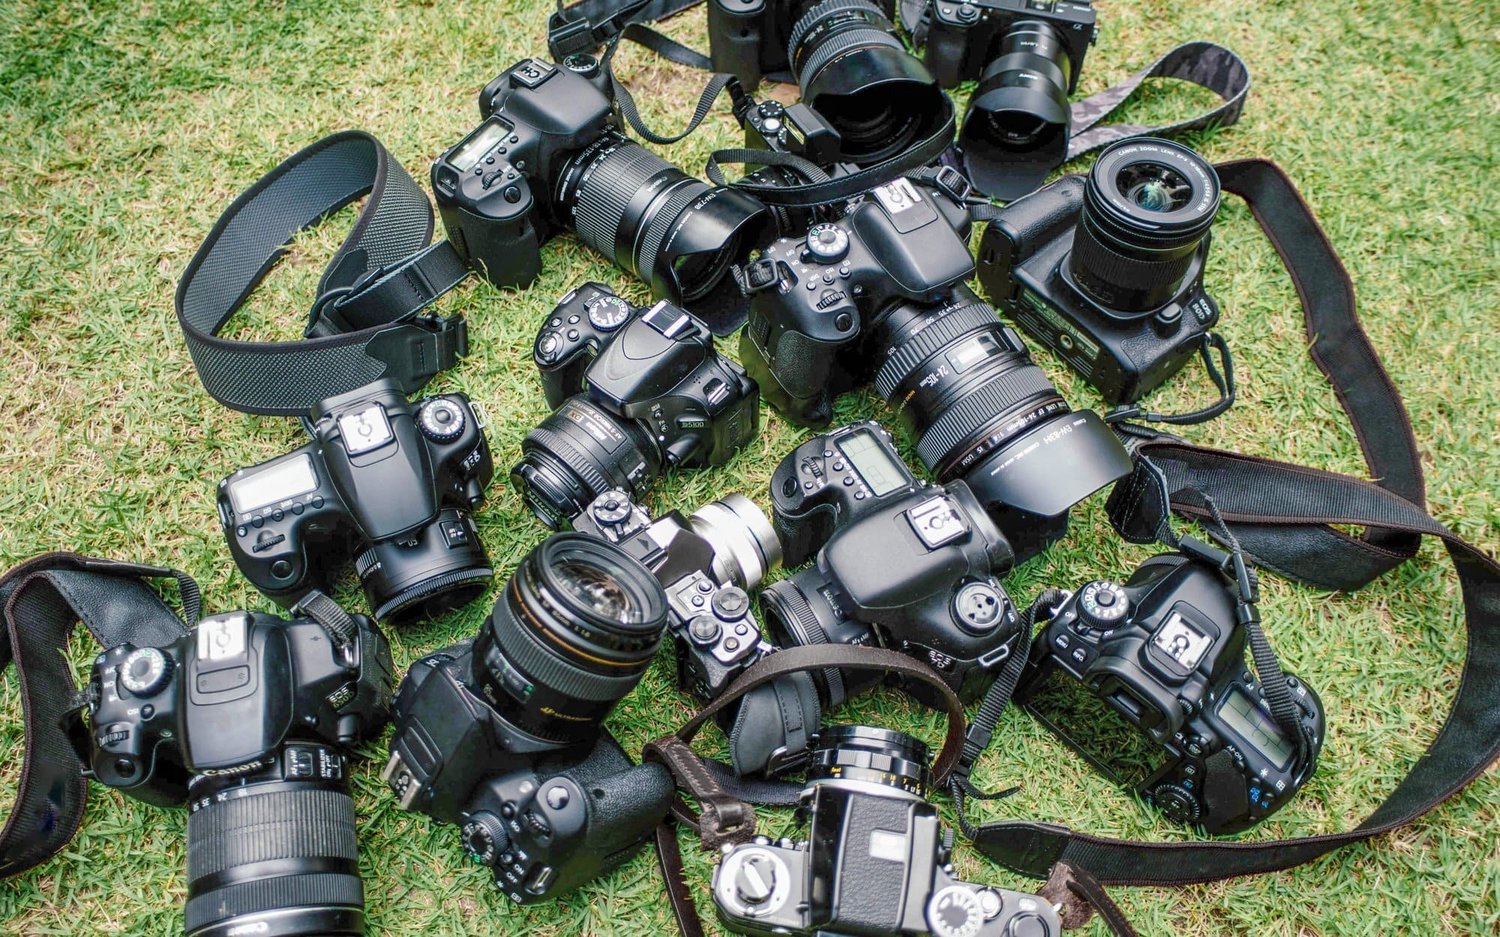 A bunch of cameras strewn across a grassy patch of ground.